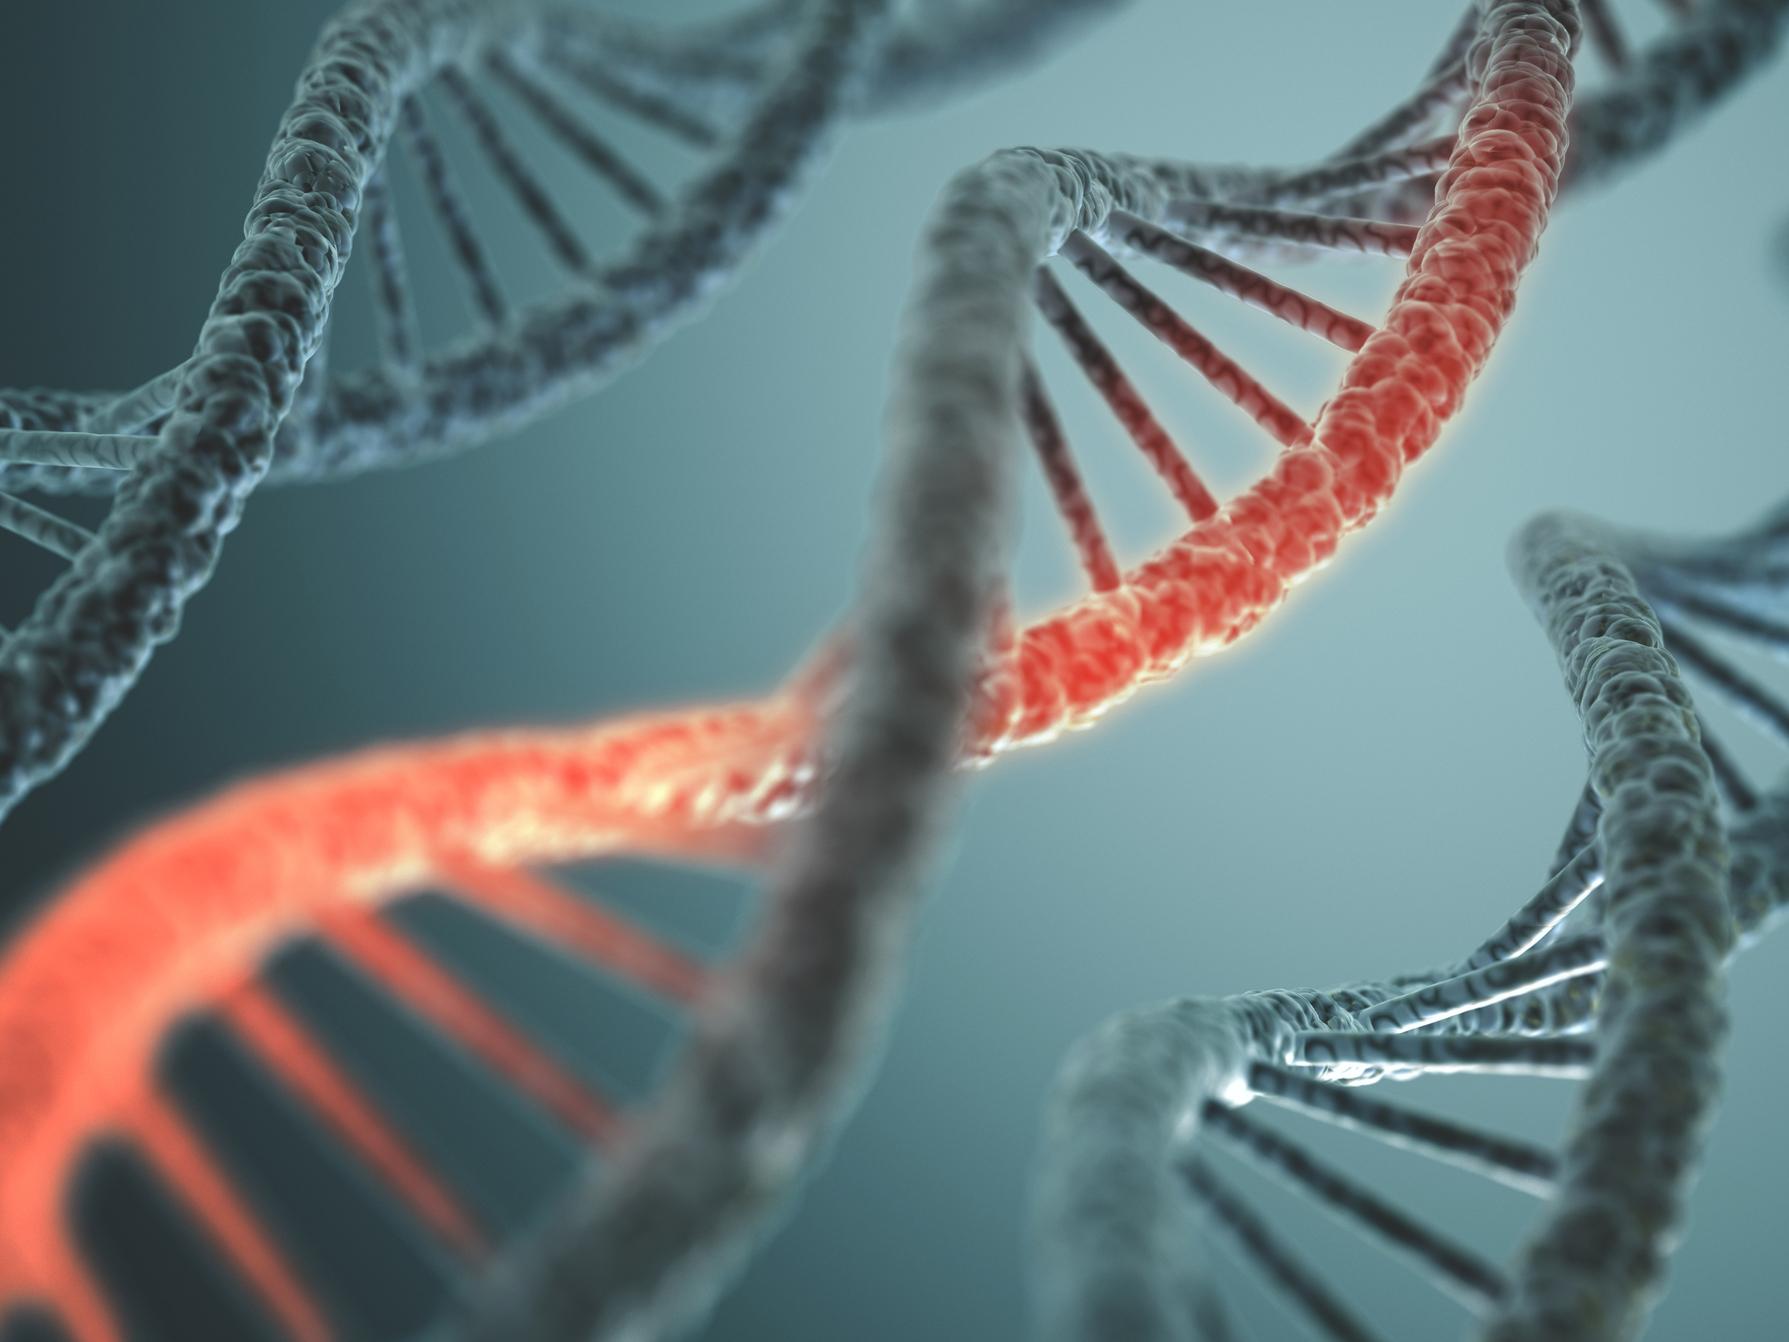 The new tool doesn't actually cut DNA; instead it activates genes that are associated with disease, and reverses the effects of serious conditions like diabetes